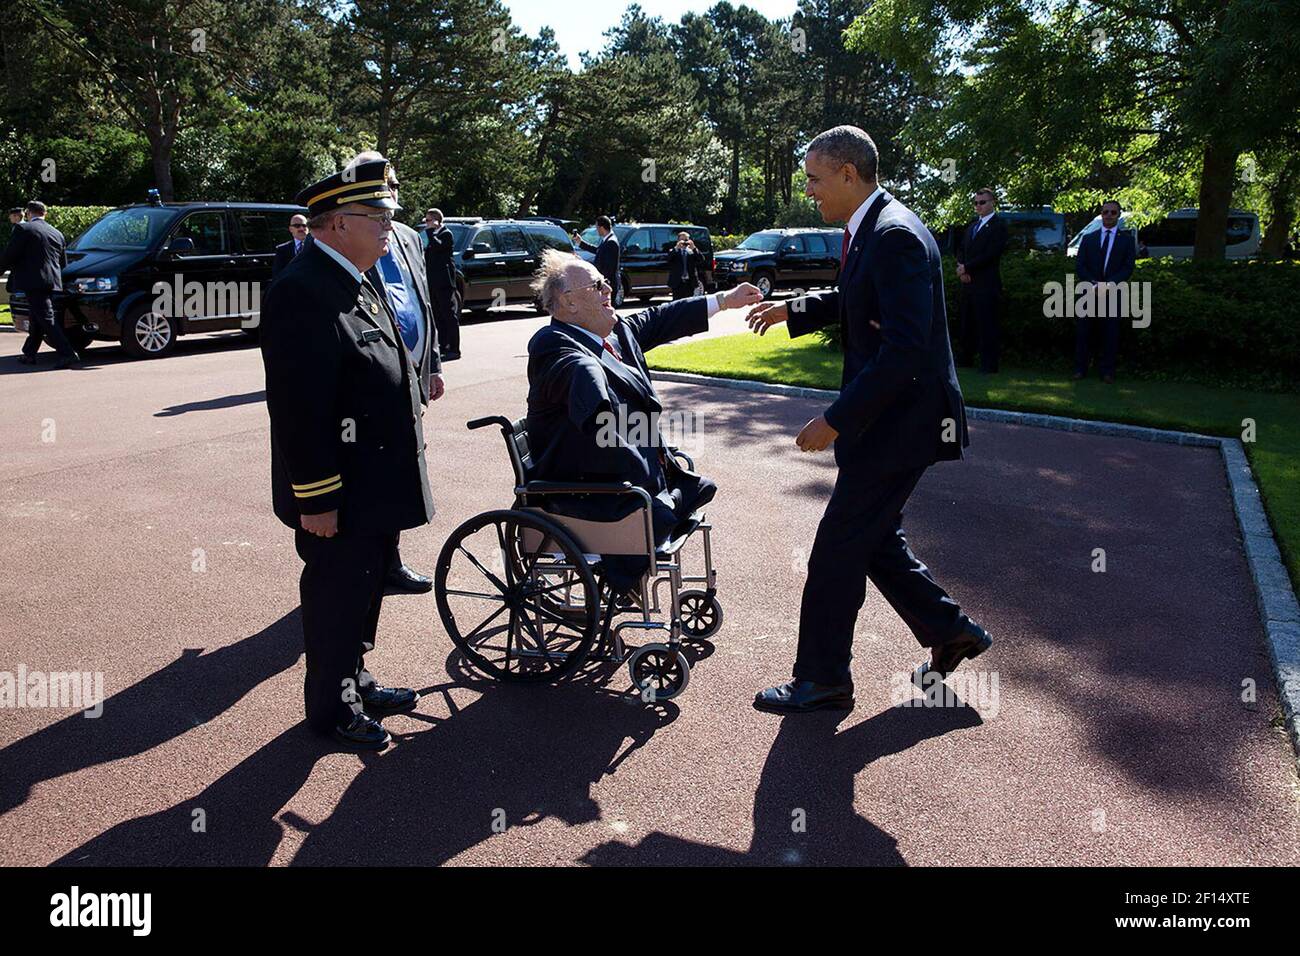 President Barack Obama is welcomed by former Senator Max Cleland and Dan Neese, upon arrival for the 70th French-American Commemoration D-Day Ceremony in Colleville-sur-Mer, France, June 6, 2014 Stock Photo